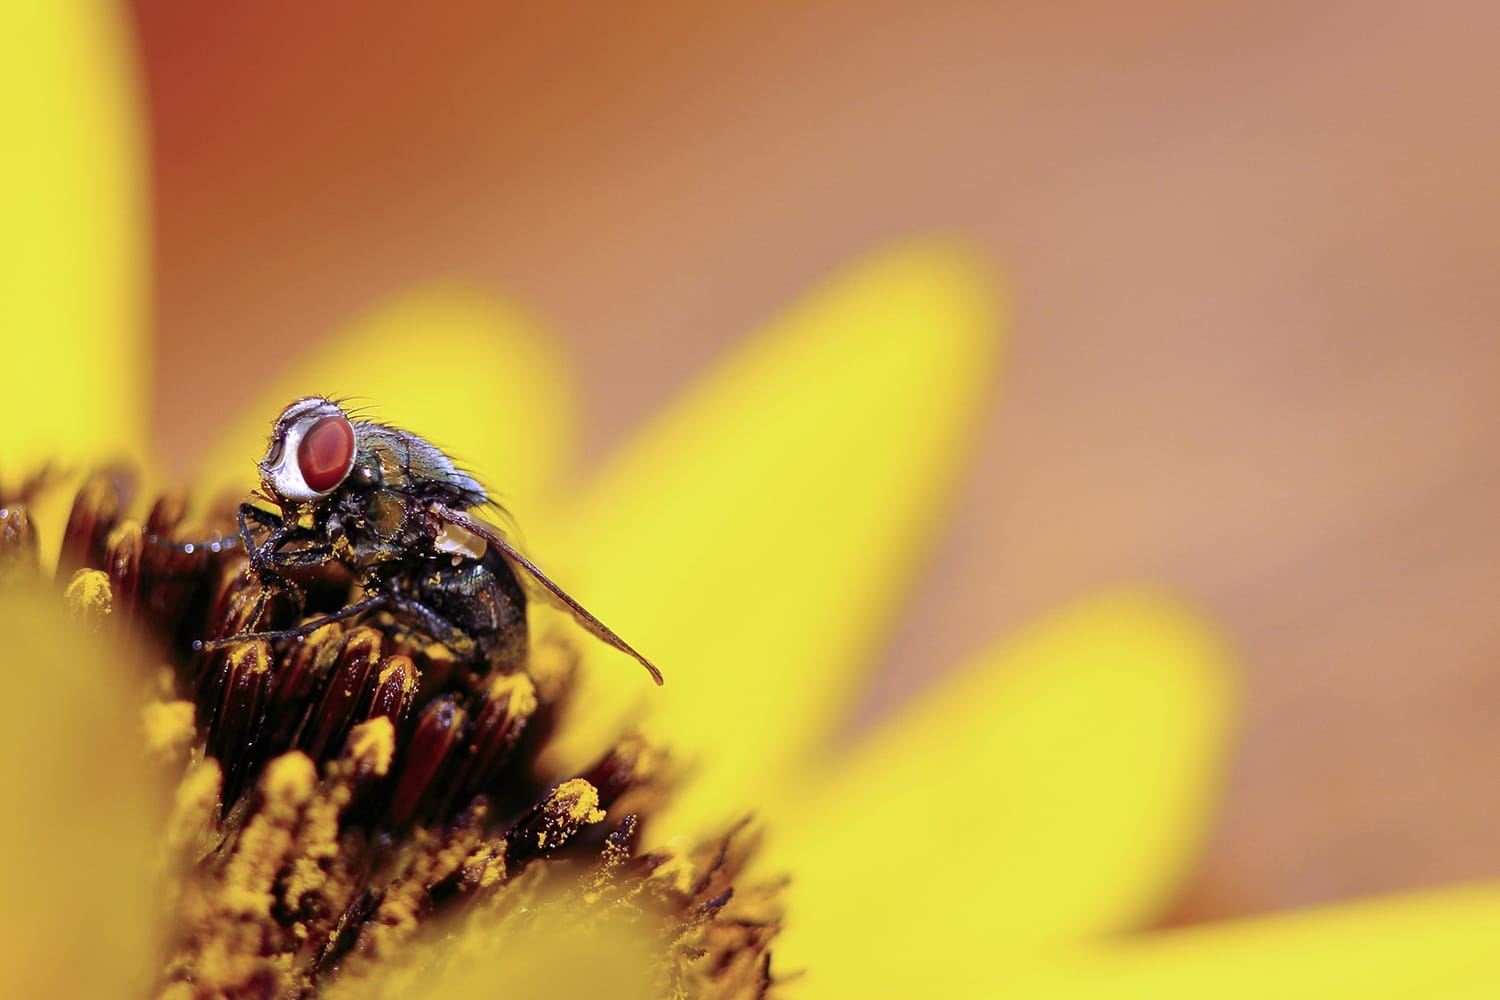 The Complete Guide to Getting Started With Macro Photography